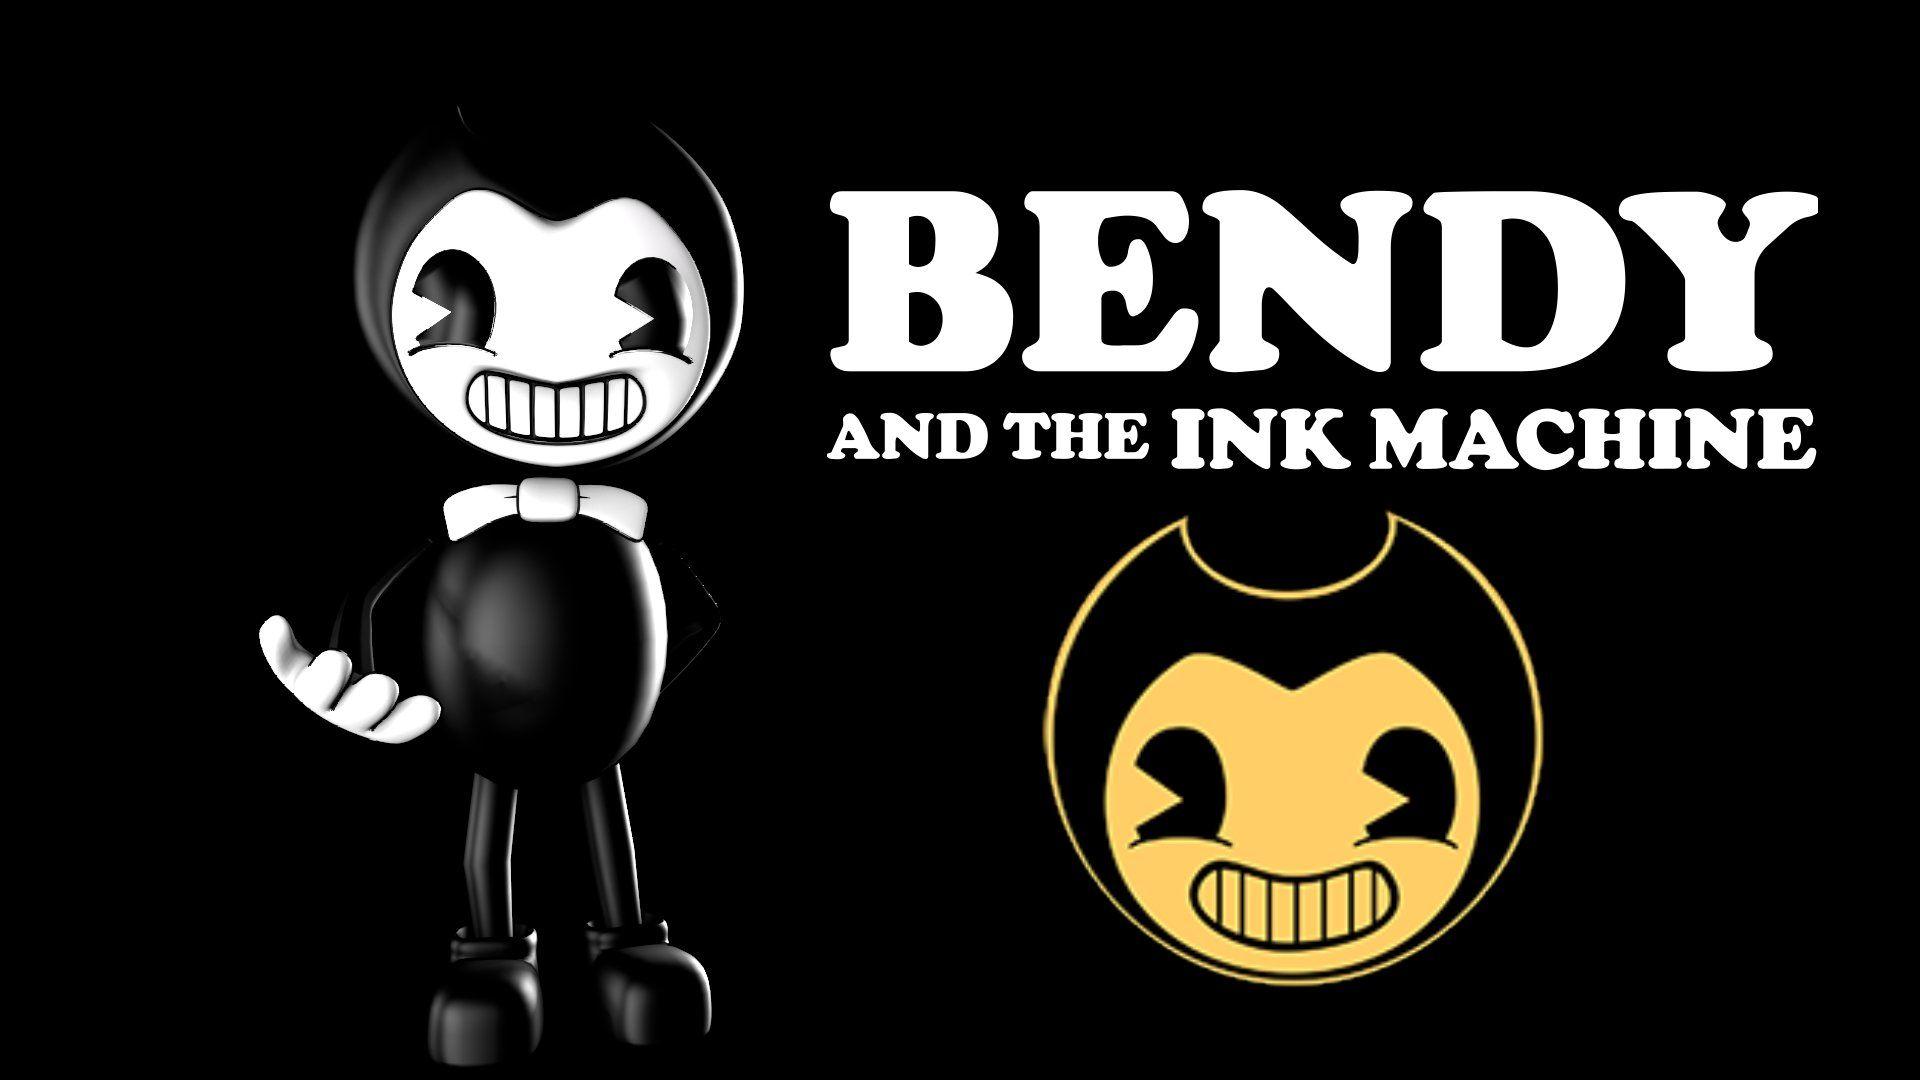 Bendy And The Ink Machine Wallpapers on WallpaperGet.